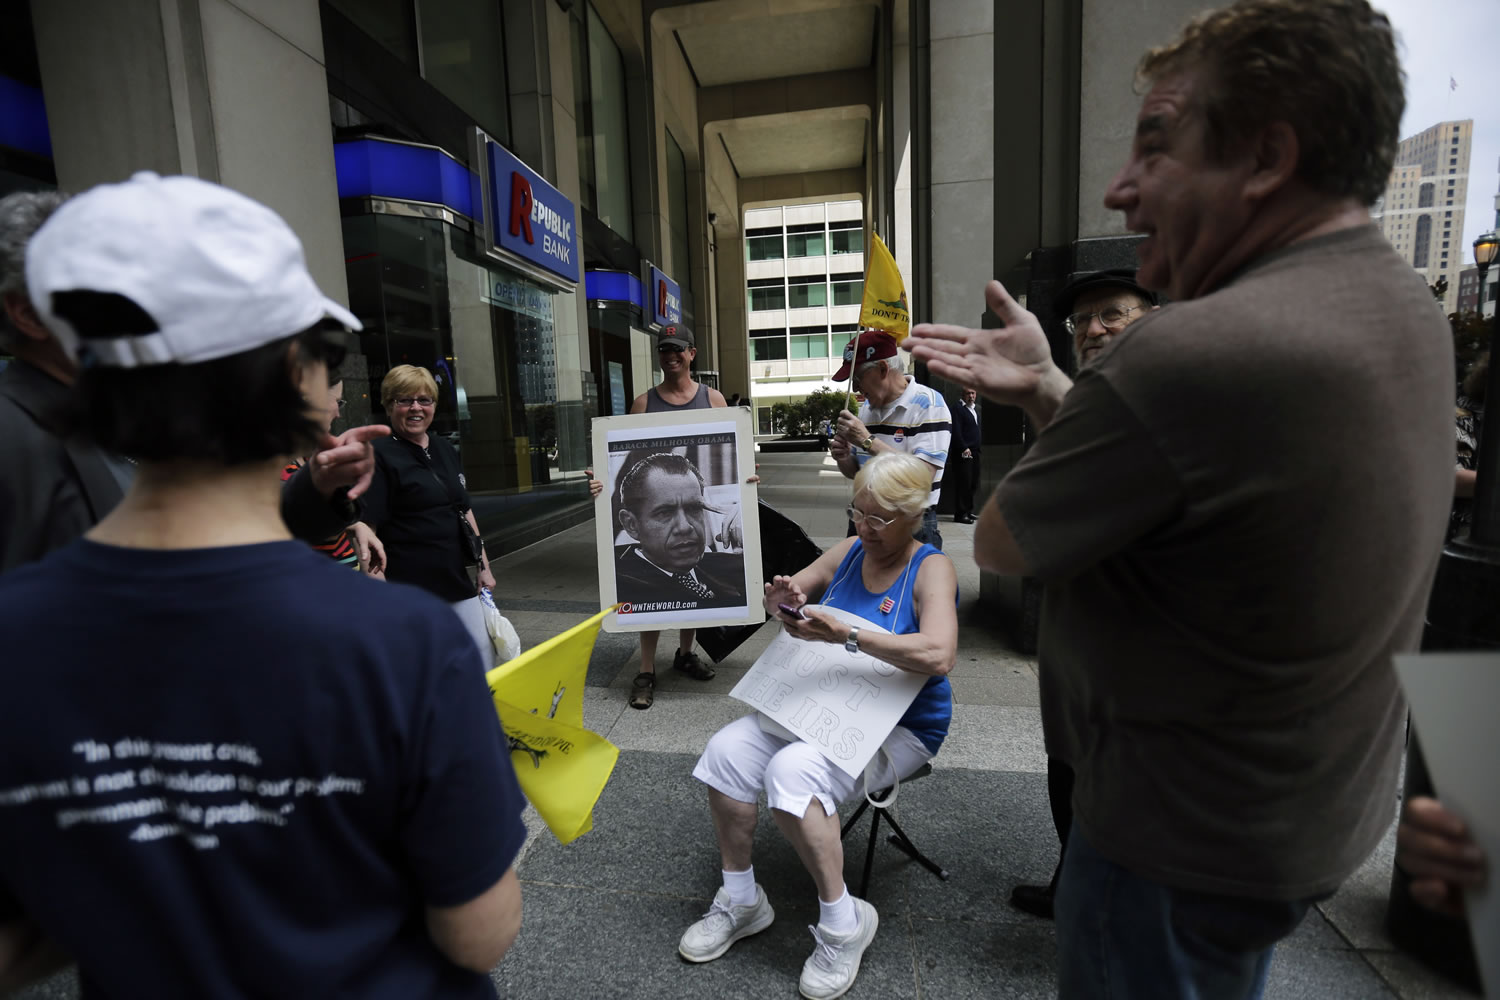 Protesters gather during a tea party rally against the extra IRS scrutiny of their groups Tuesday in Philadelphia.